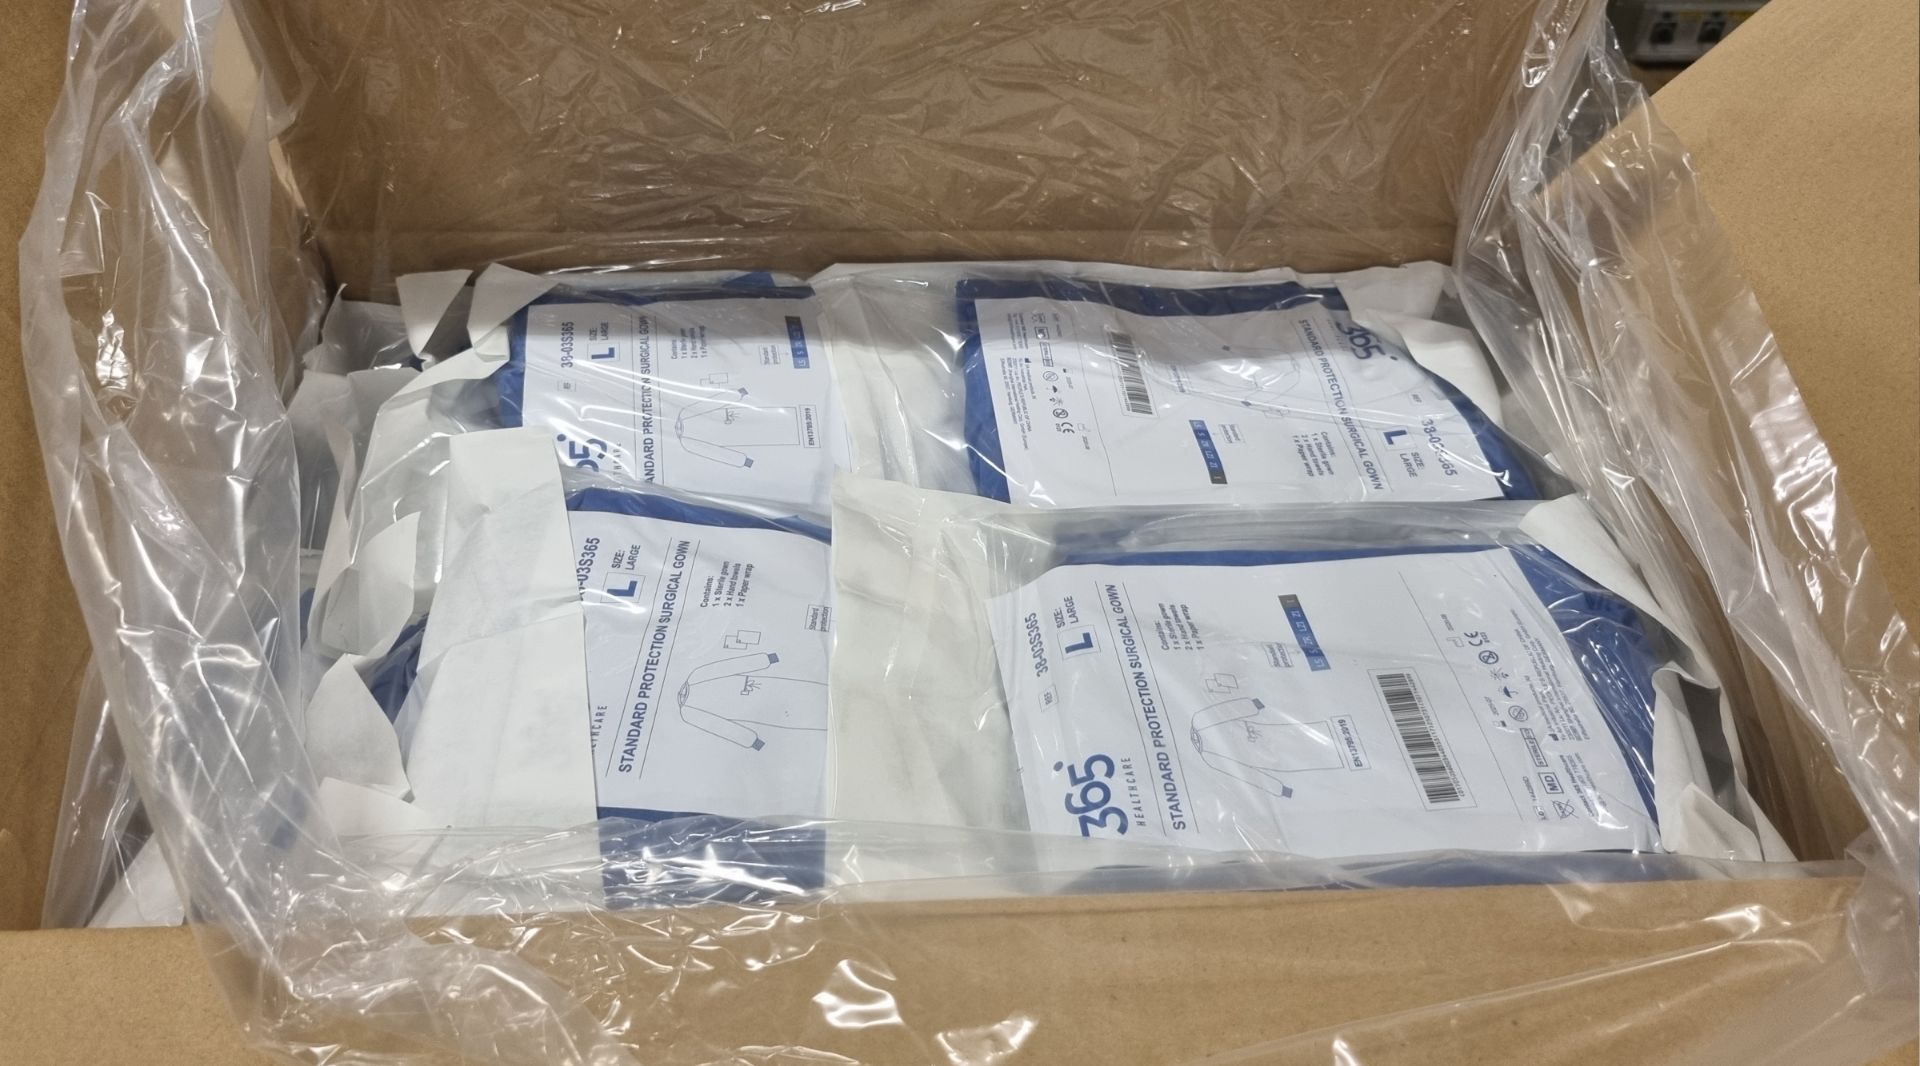 25x boxes of 365 Healthcare standard protection surgical gowns - large - expiration date: 07/2025 - Image 4 of 5